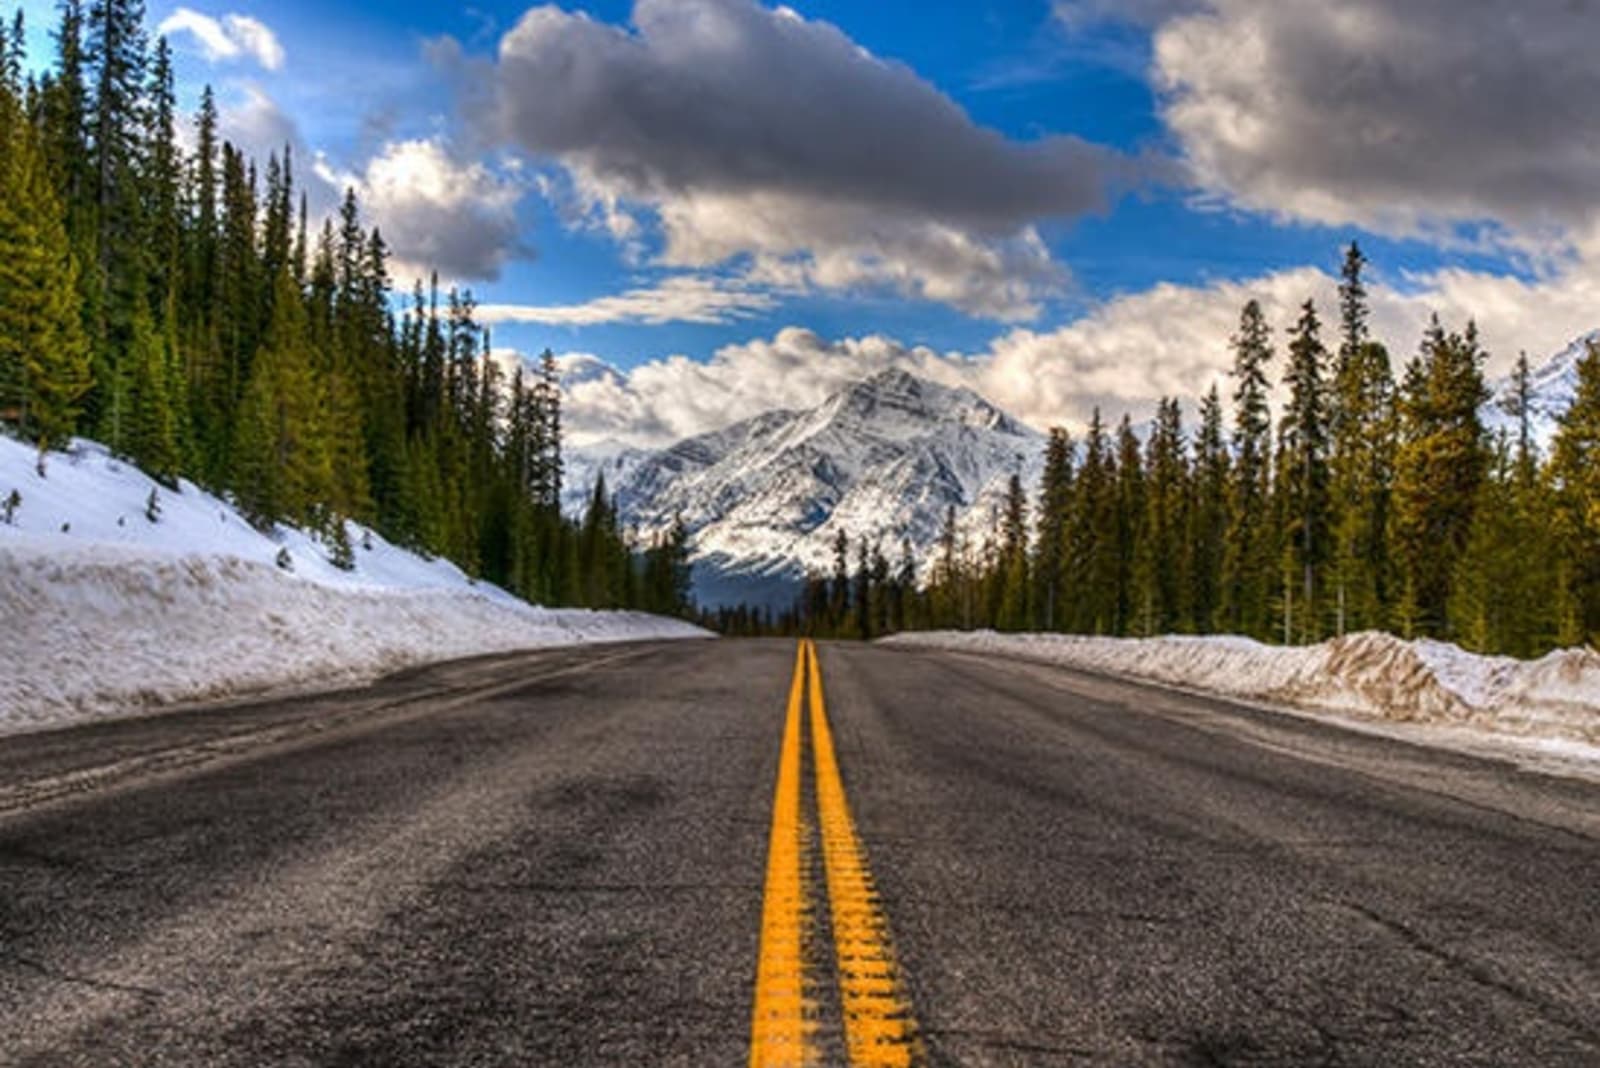 rs-icefields-parkway-shutterstock261421247.jpg